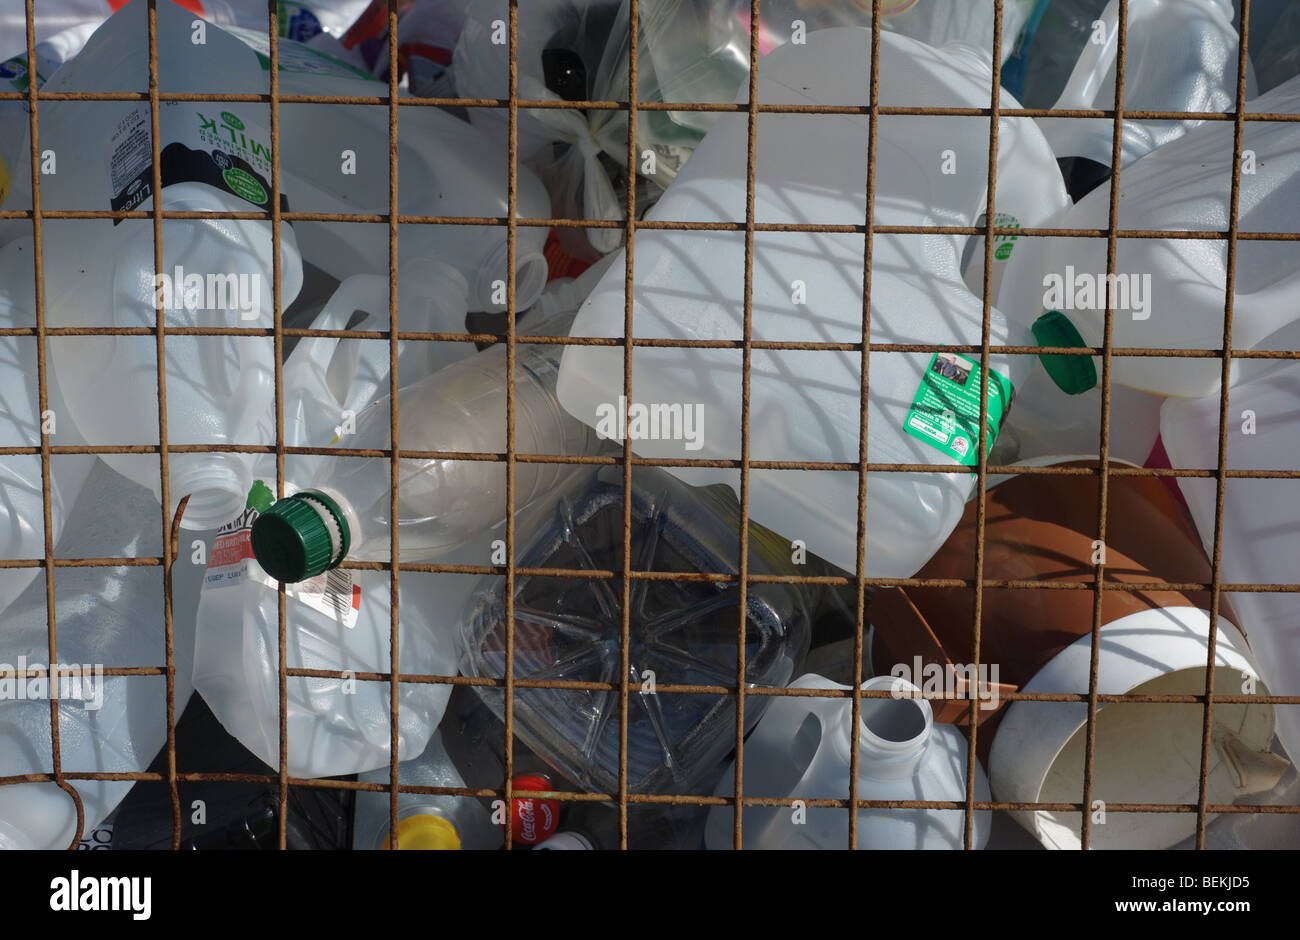 A variety of plastic bottles in a collection cage or container ready for recycling Stock Photo